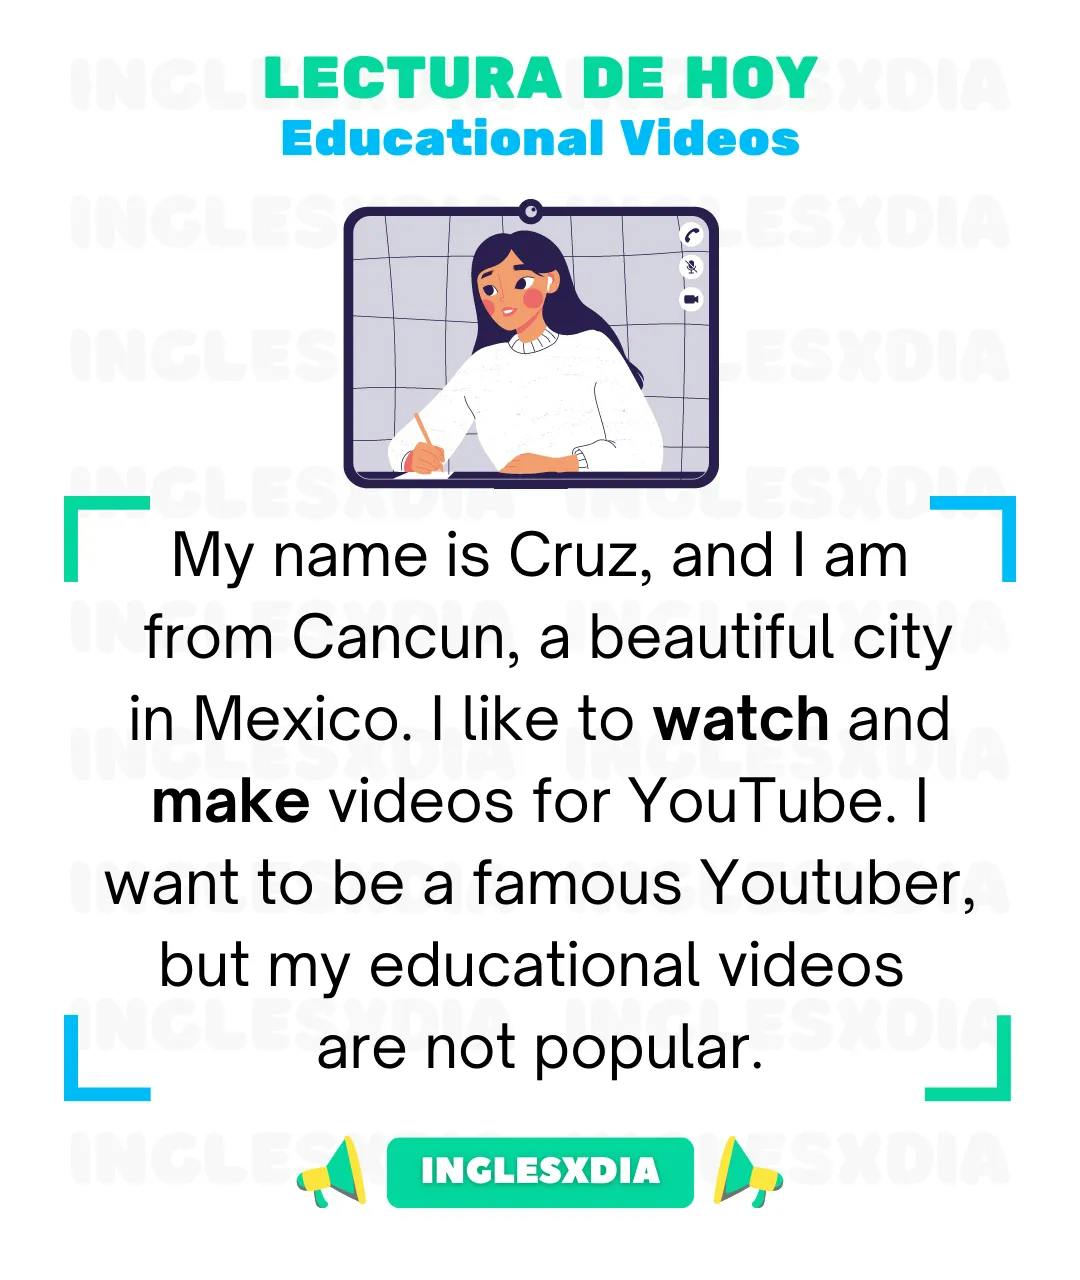 Educational Video﻿s